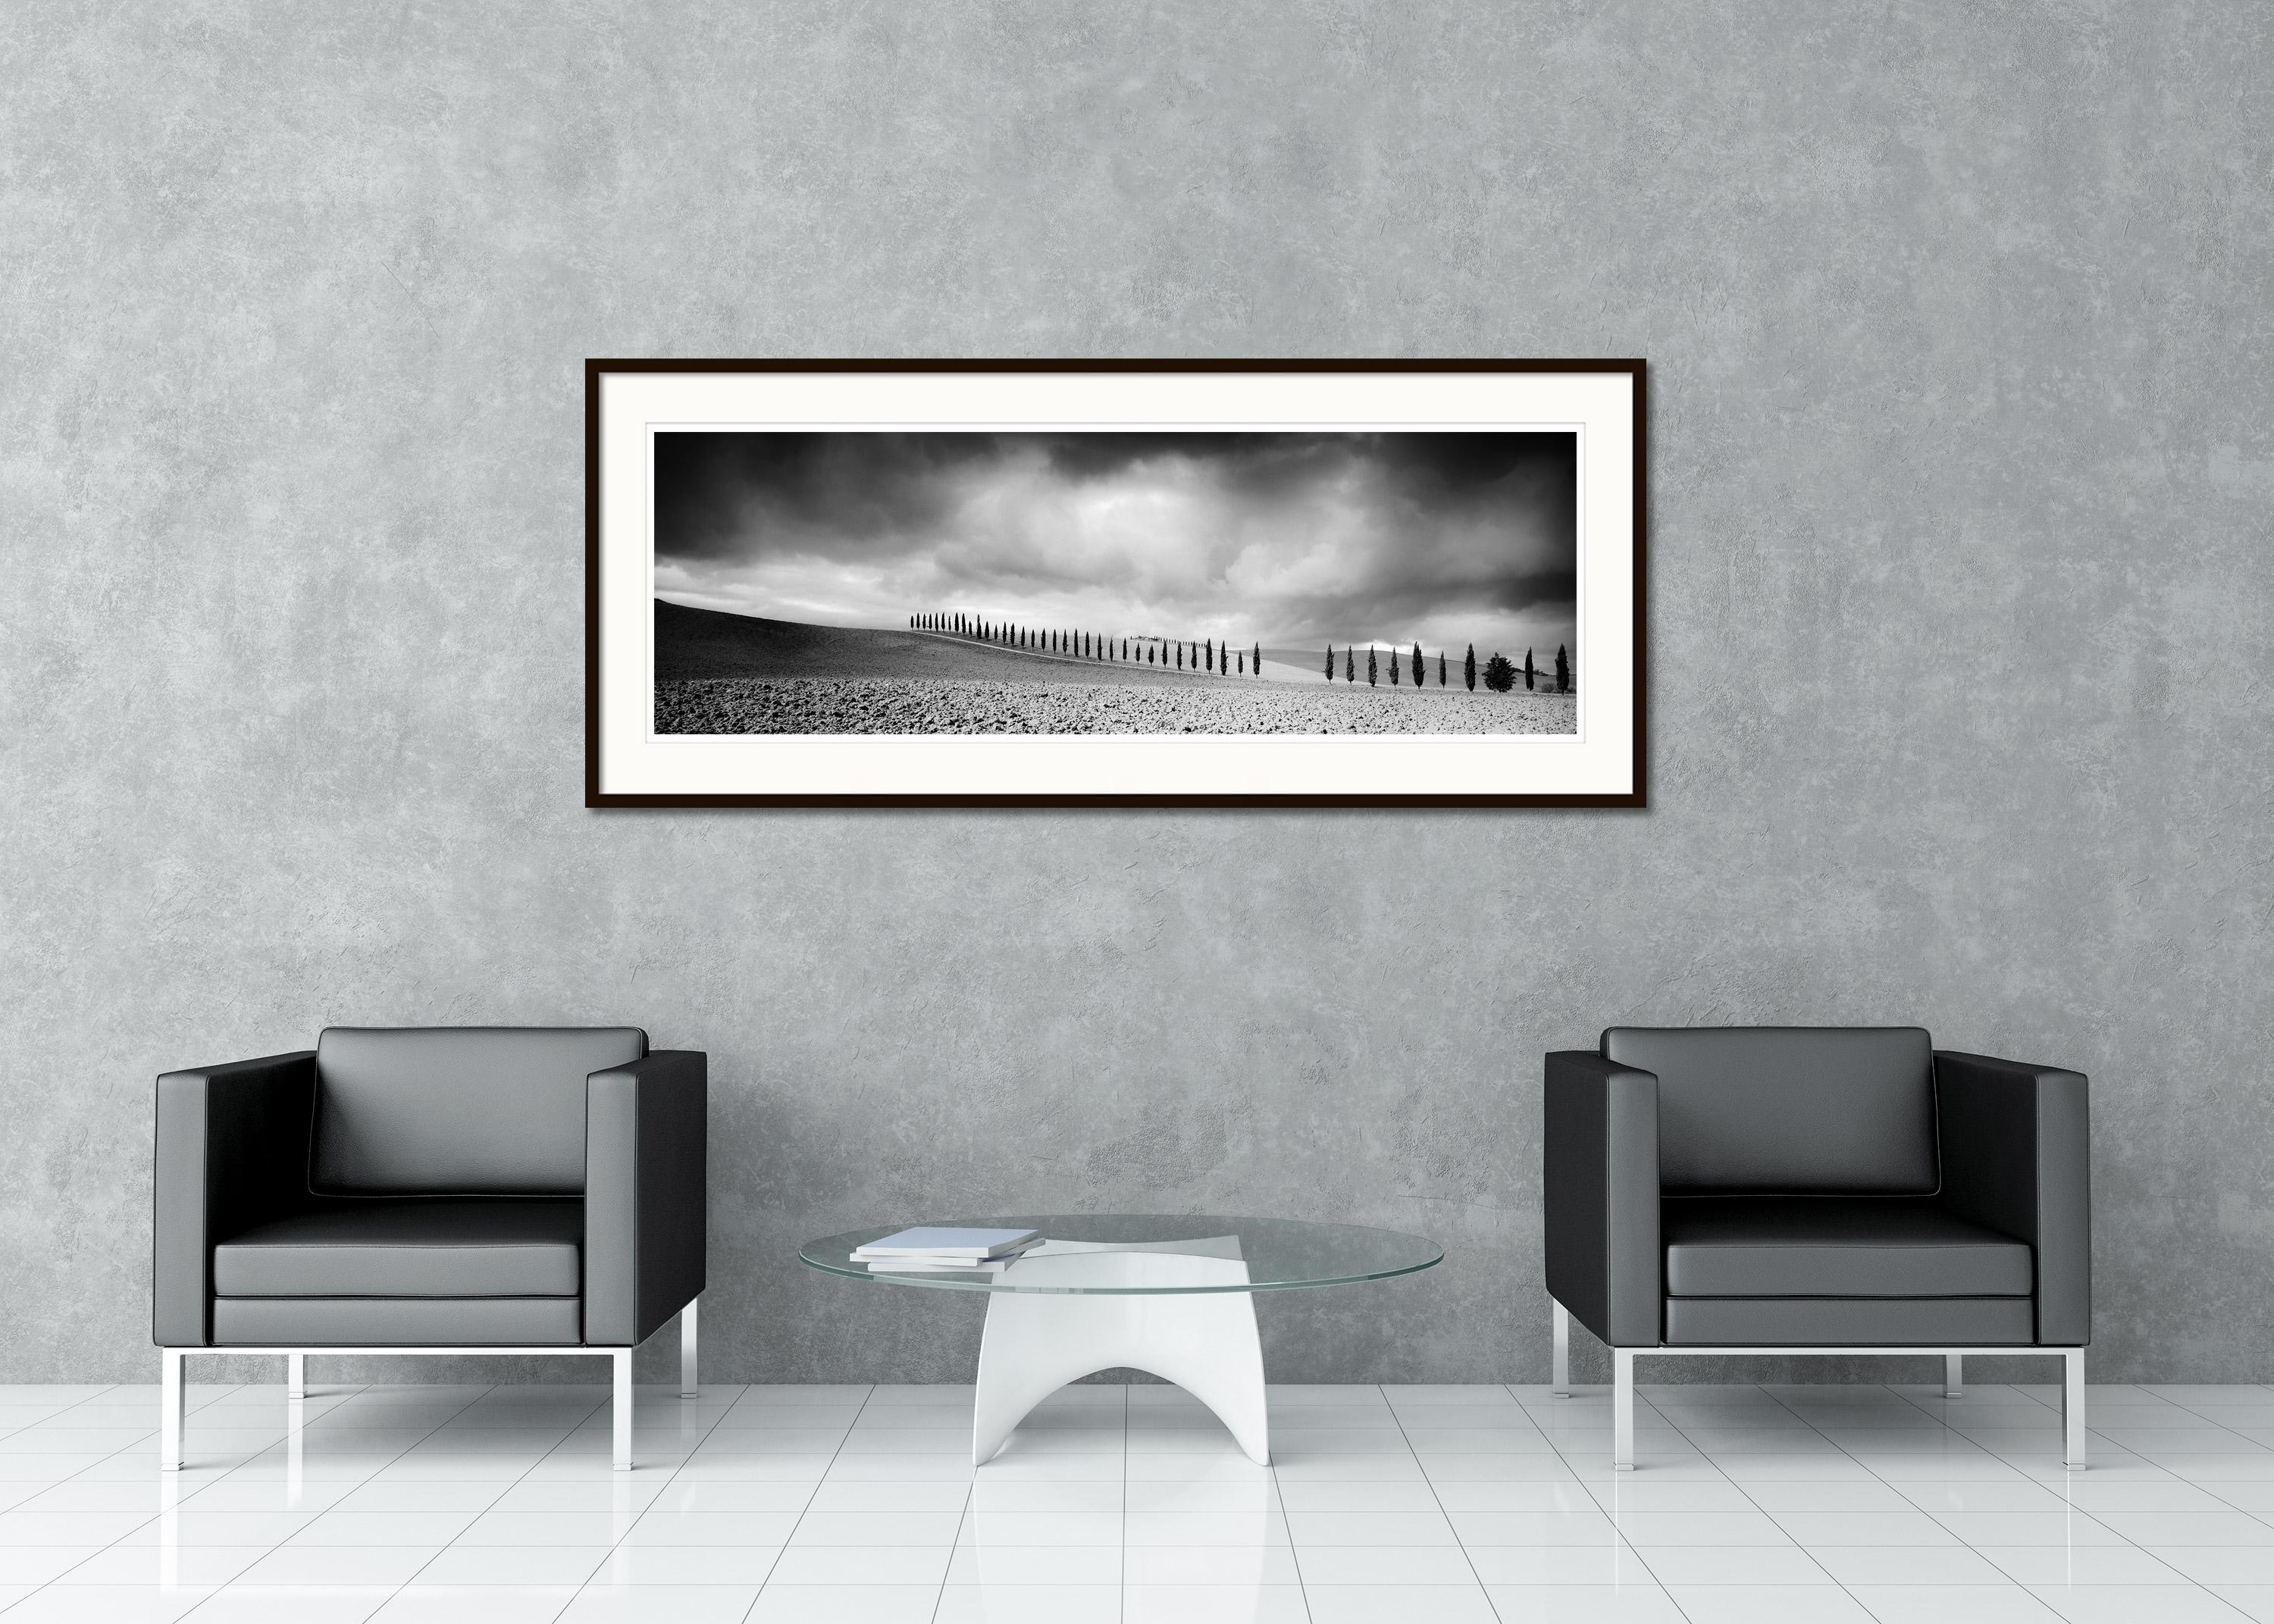 Black and white fine art landscape panorama photography. Cypress tree avenue along a path in stormy weather in Tuscany, Italy. Archival pigment ink print, edition of 9. Signed, titled, dated and numbered by artist. Certificate of authenticity